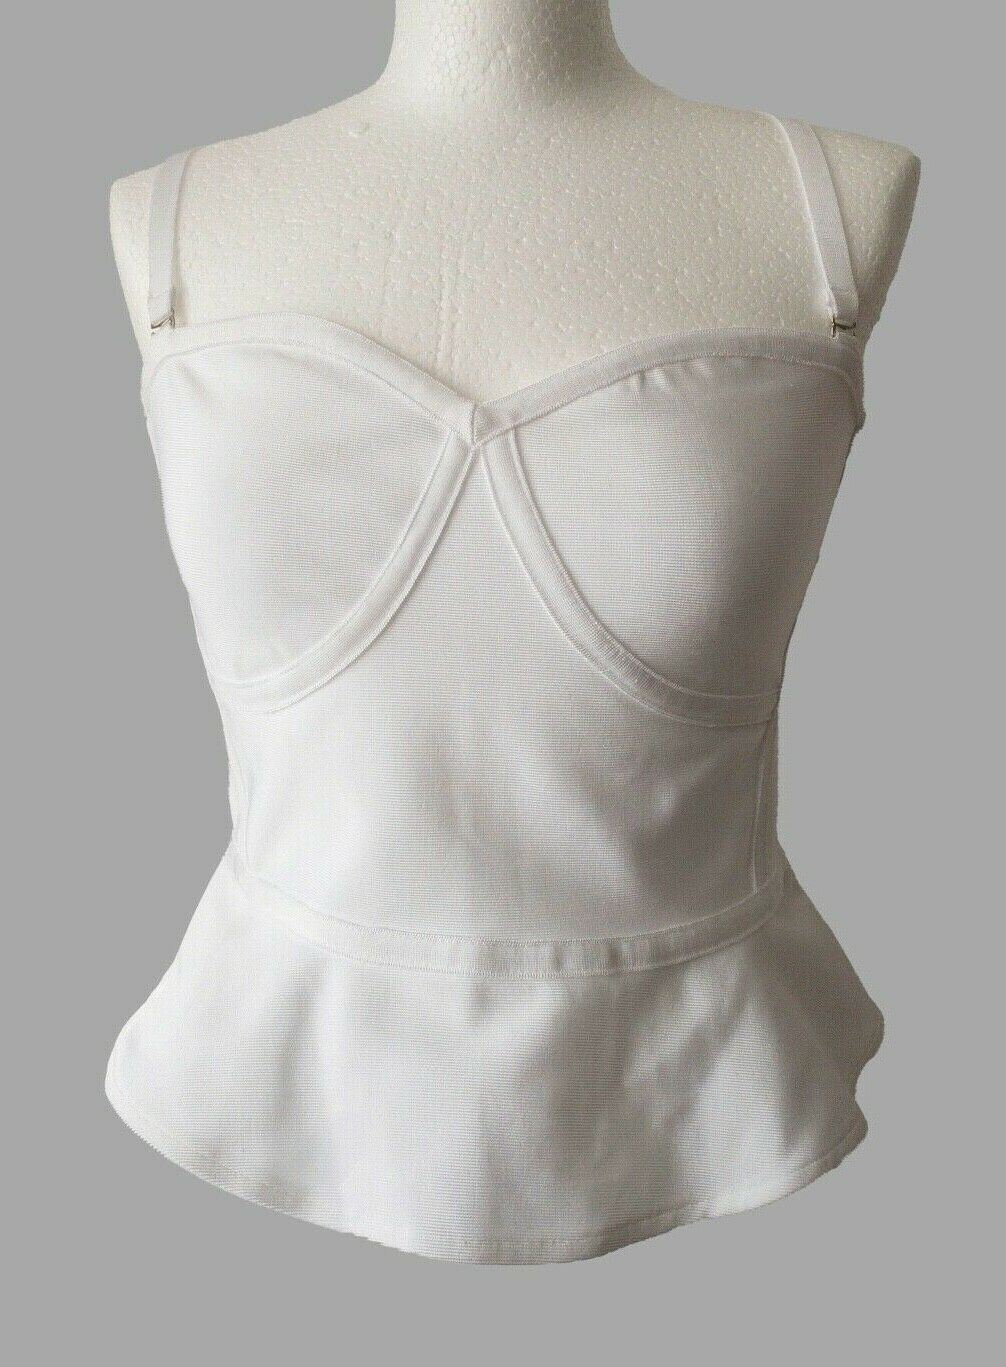 Wow Couture White Cropped Peplum Bandage Corset Top Sizes 6, 8, 10